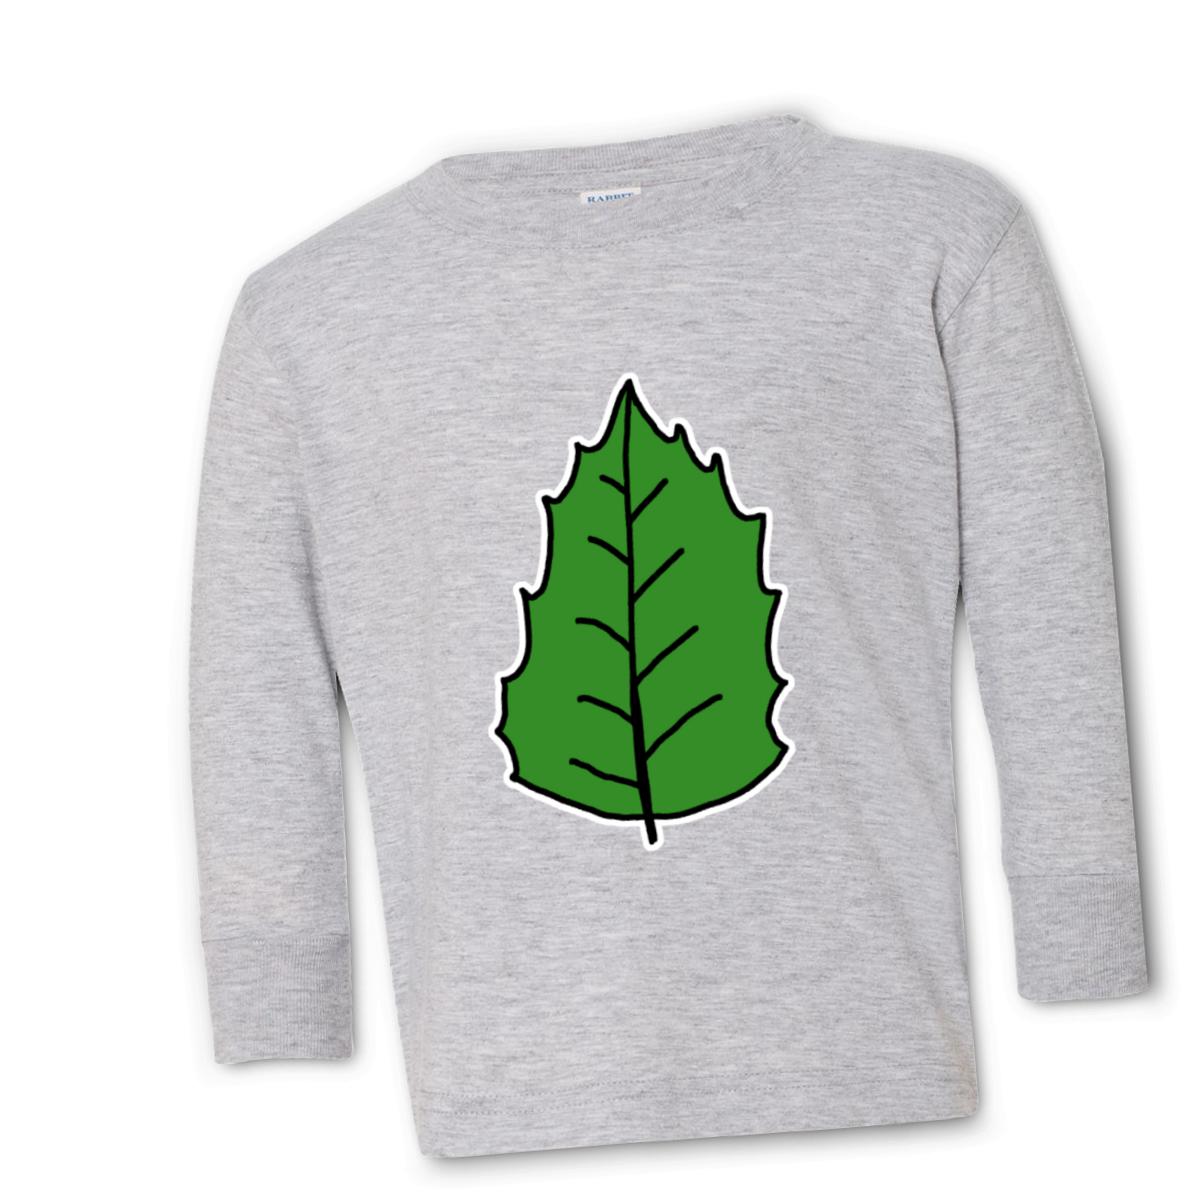 Holly Leaf Toddler Long Sleeve Tee 4T heather